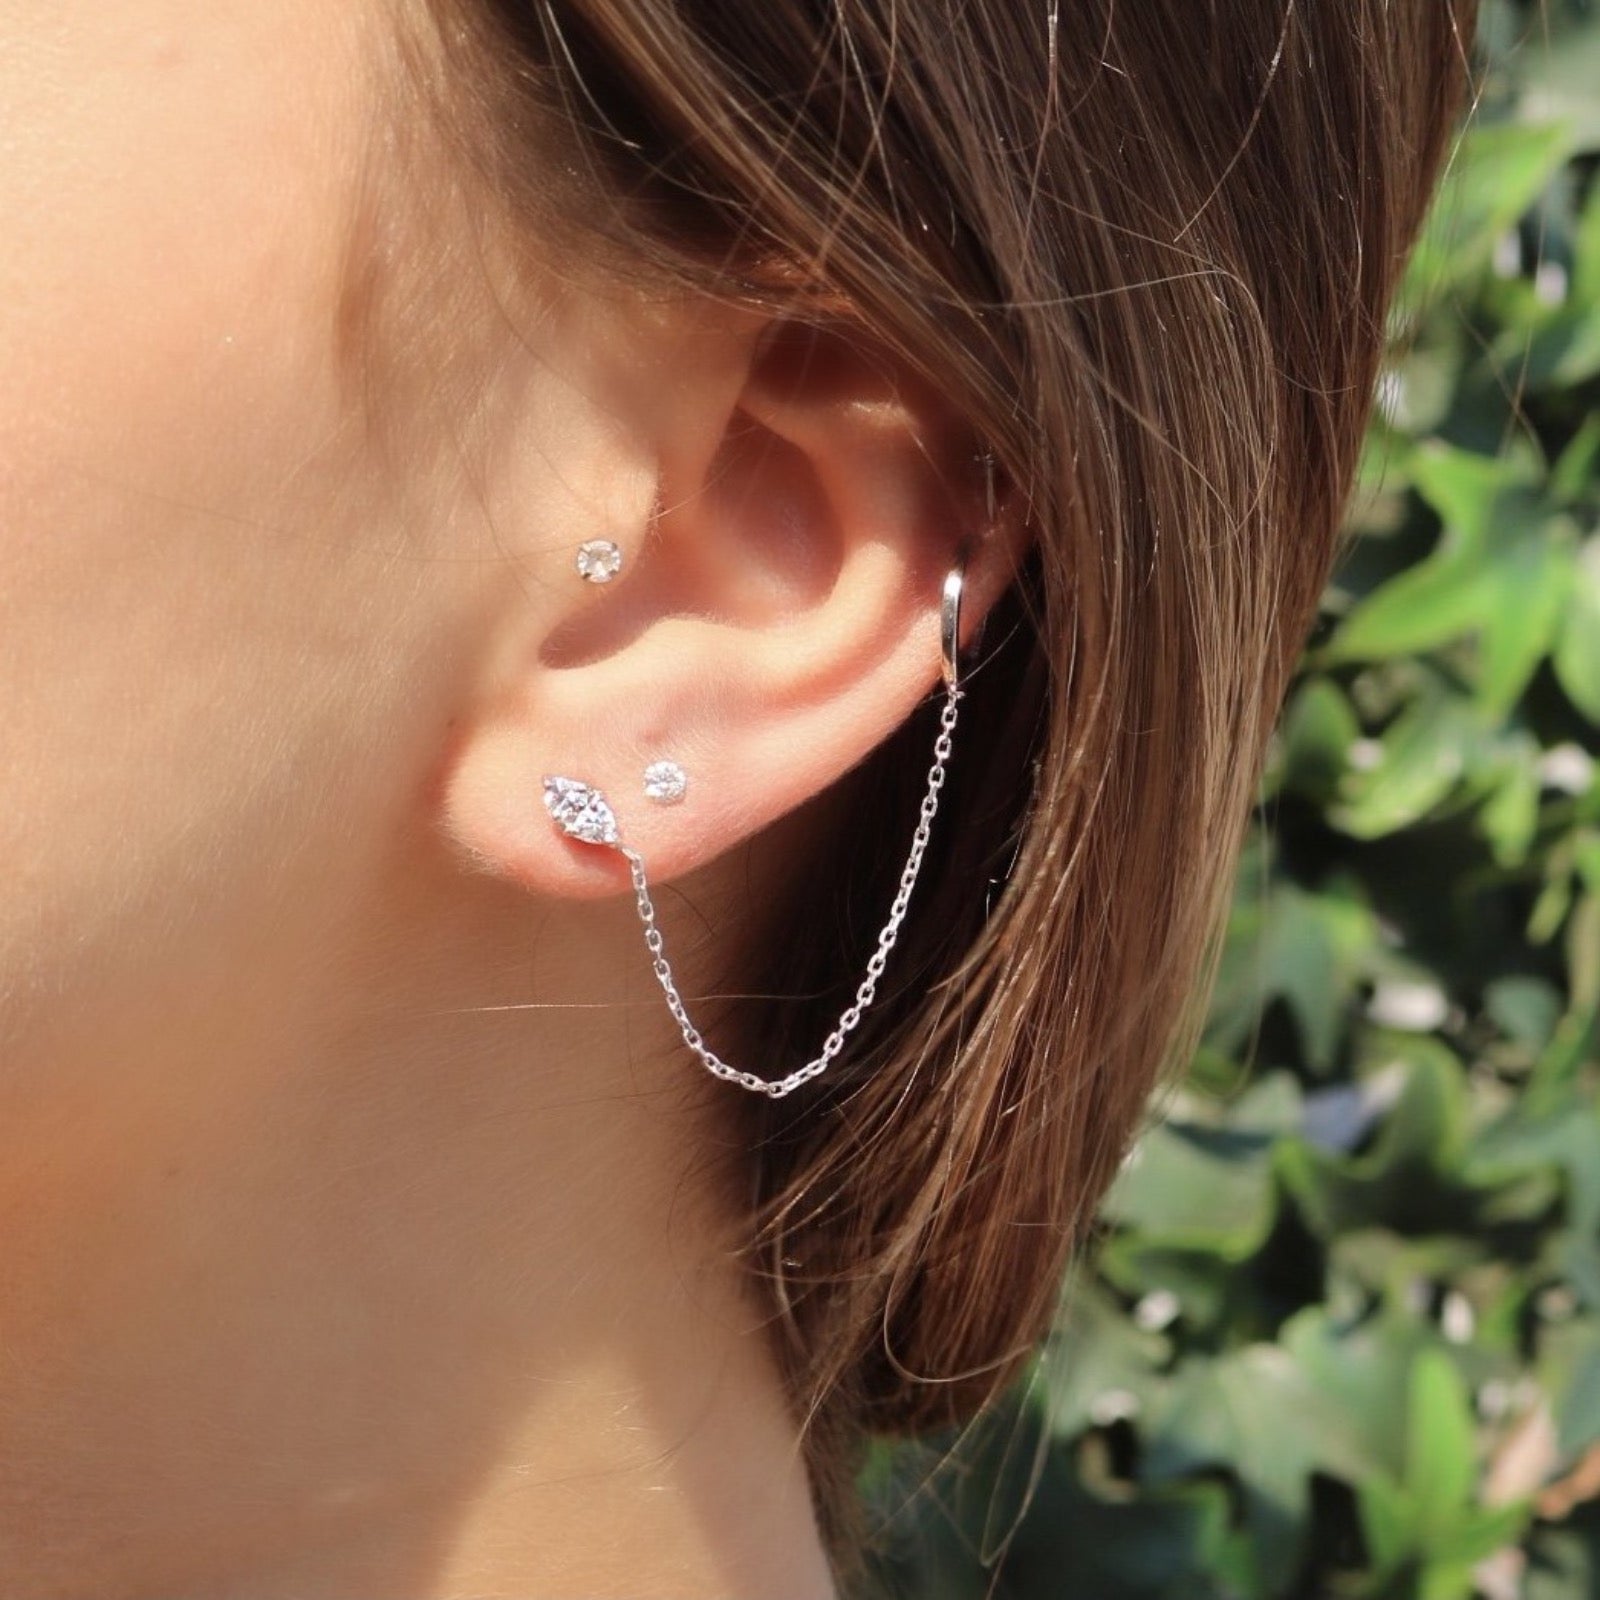 Silver Stud Earrings With Ear Cuff - Camille Jewelry